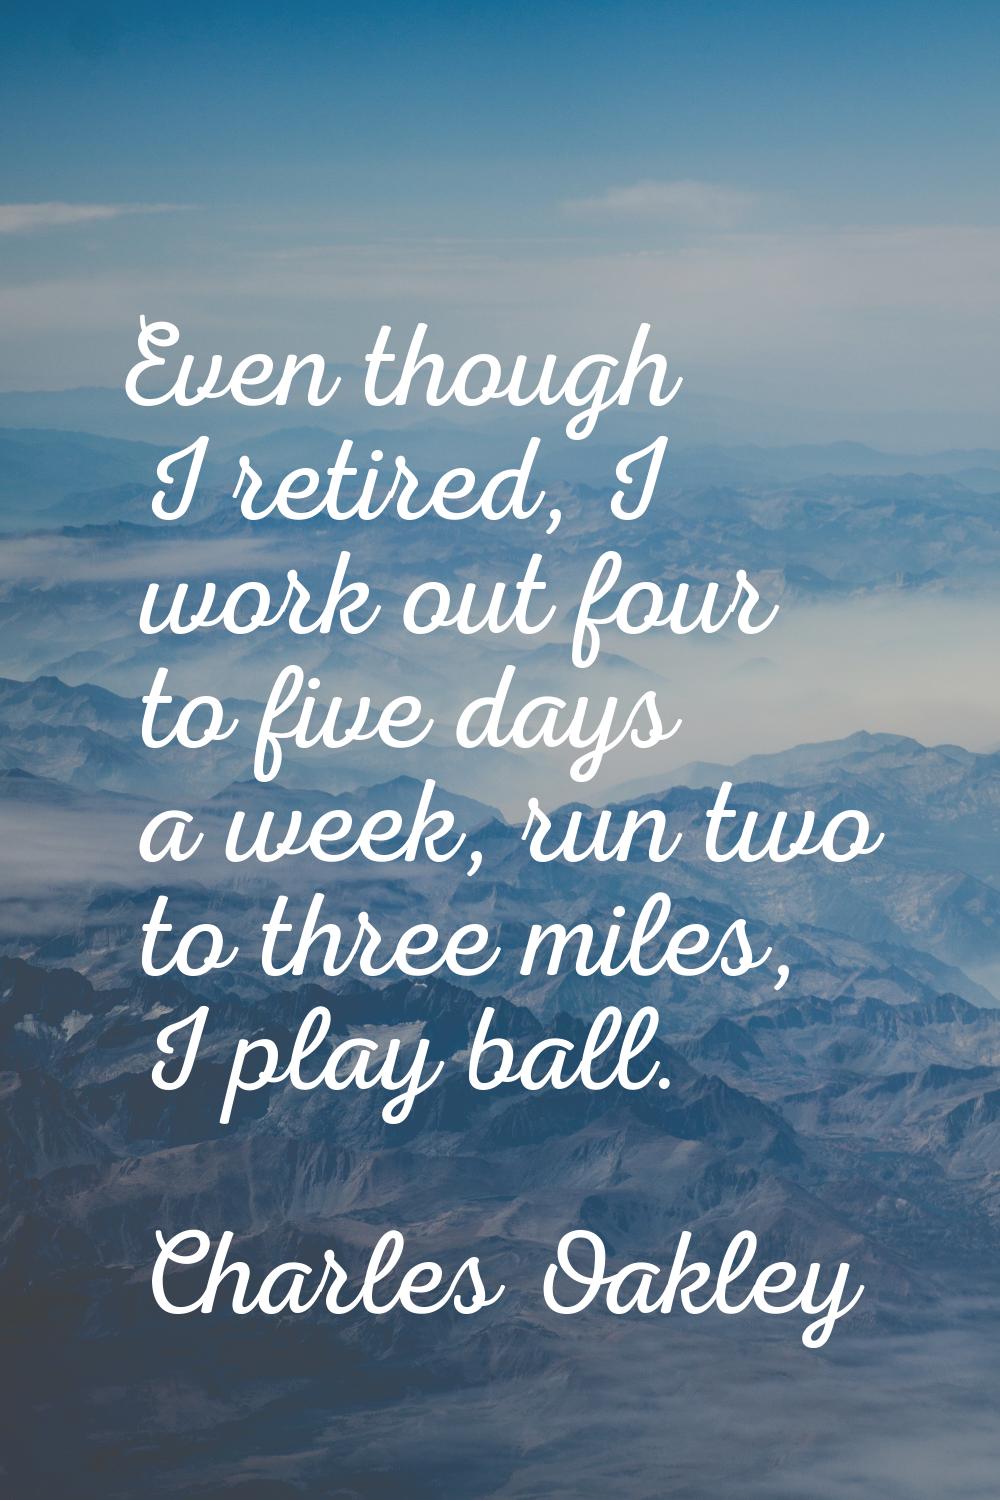 Even though I retired, I work out four to five days a week, run two to three miles, I play ball.